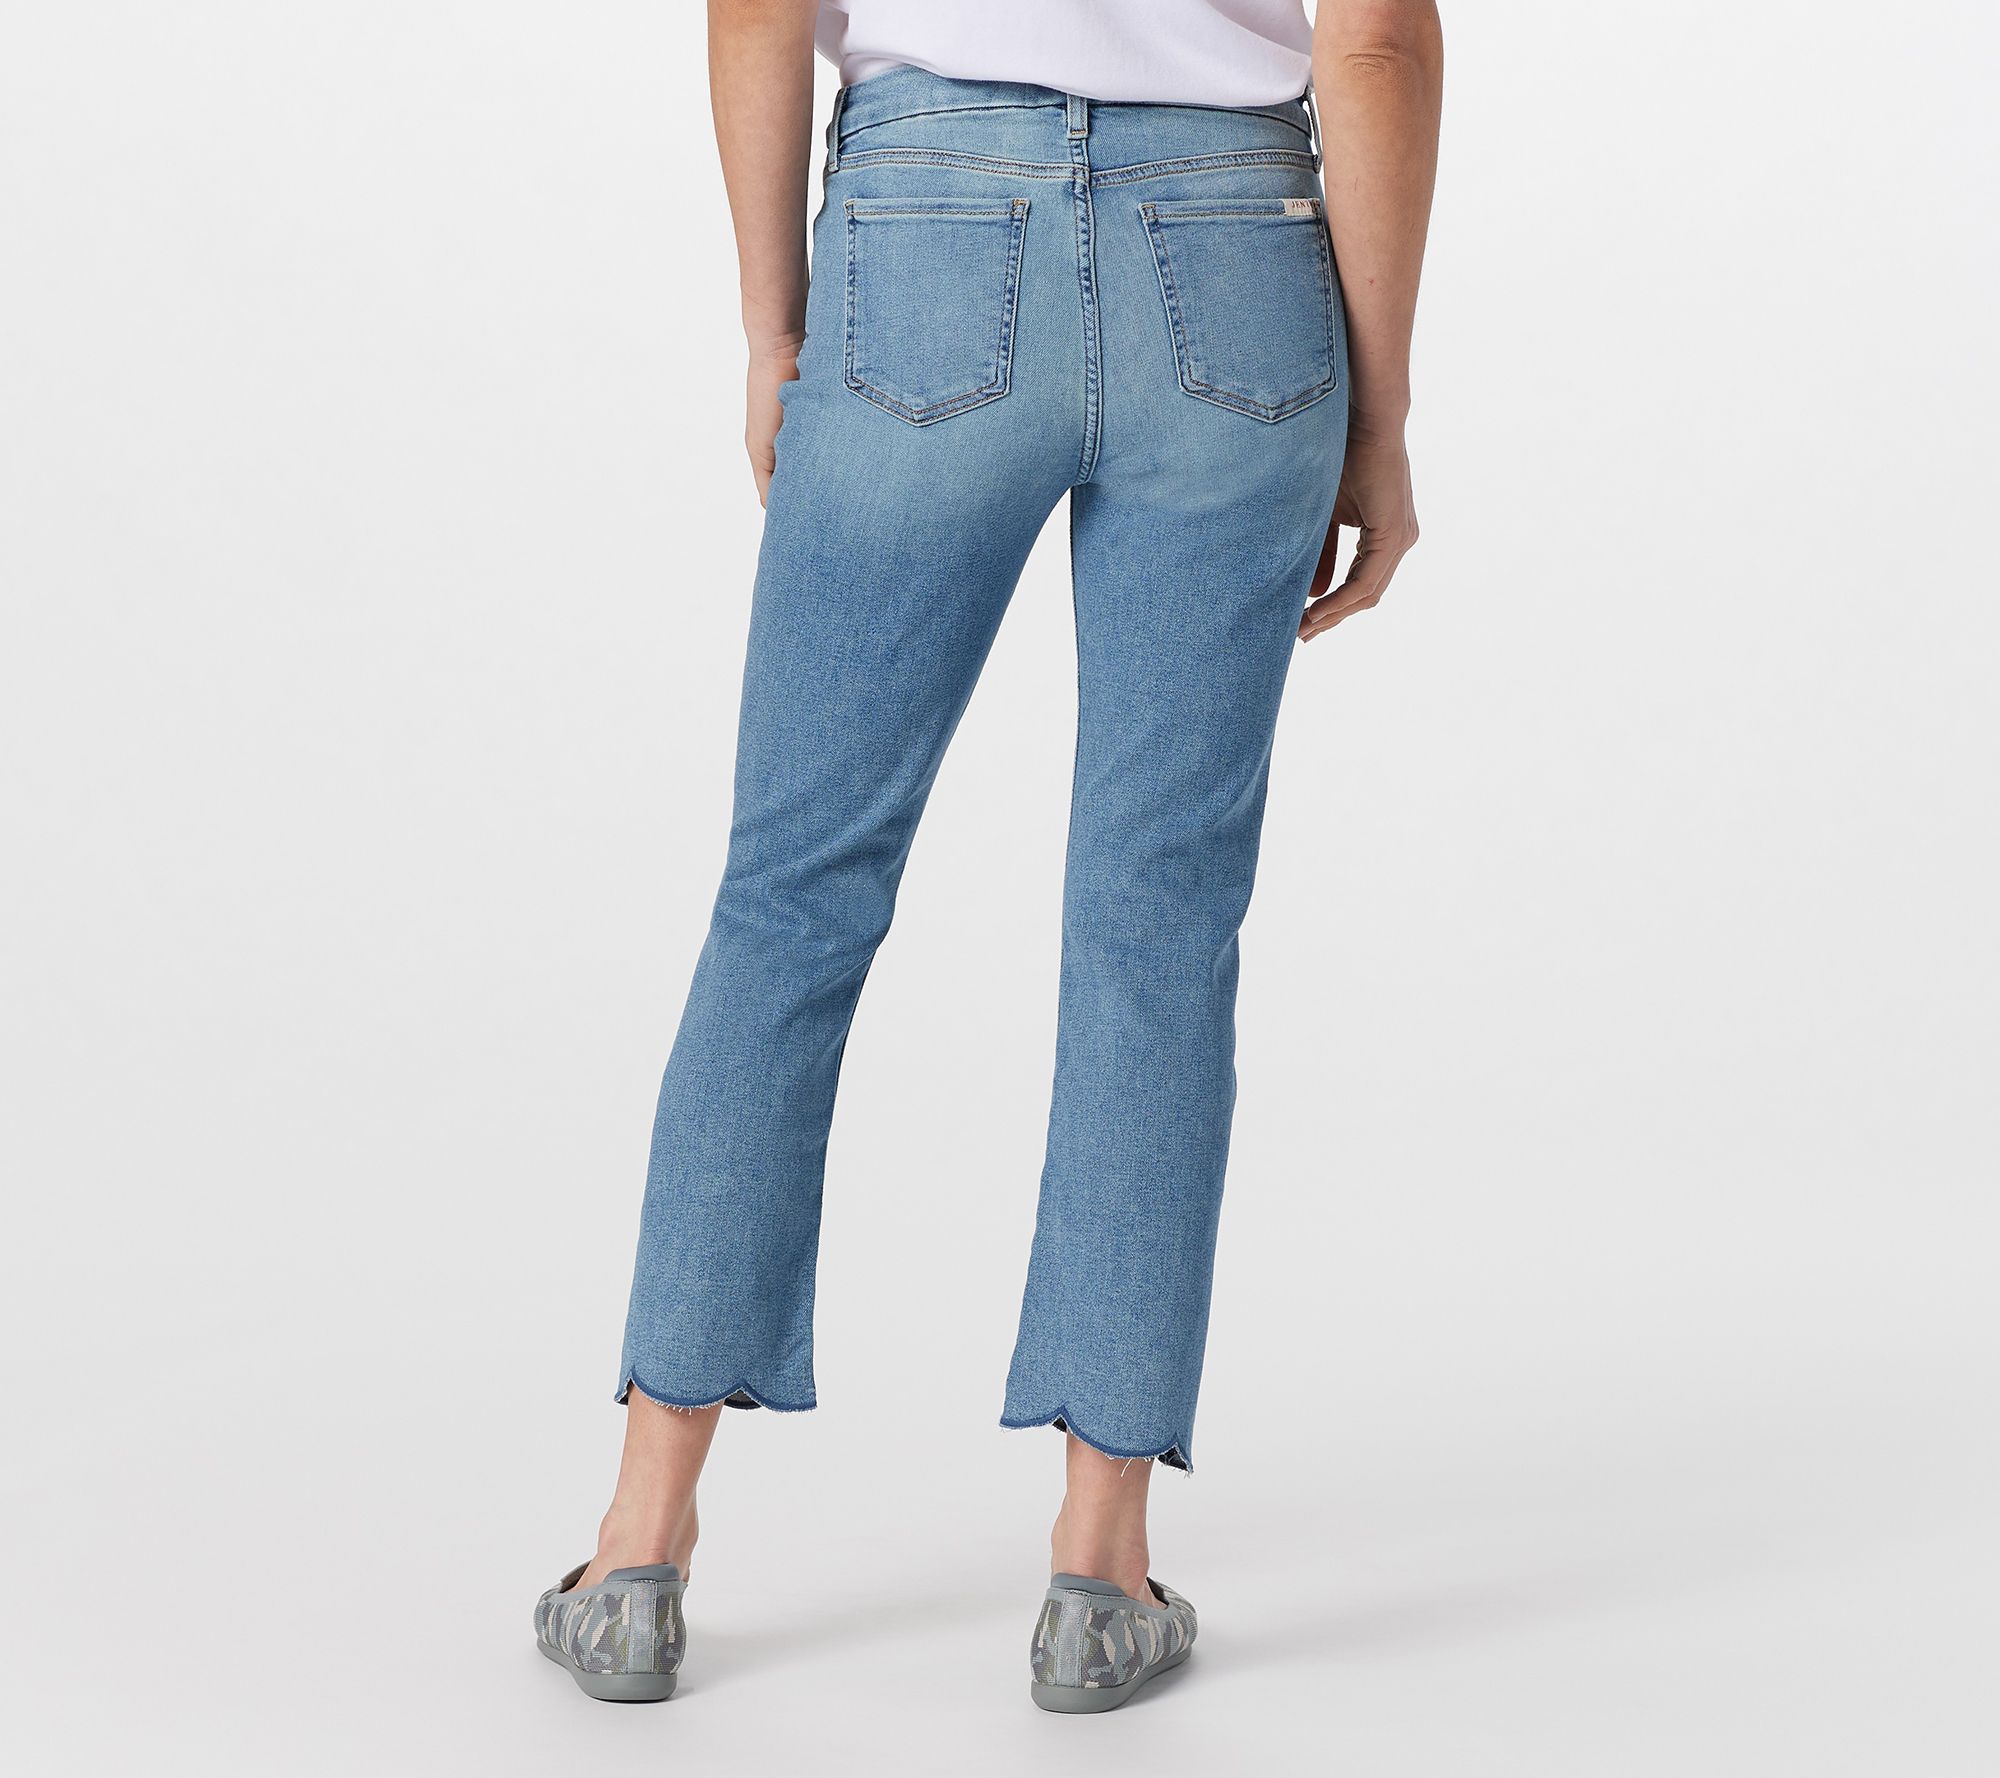 Jen7 by 7 for All Mankind Ankle Straight Leg Jeans w/ Scallop Hem - QVC.com